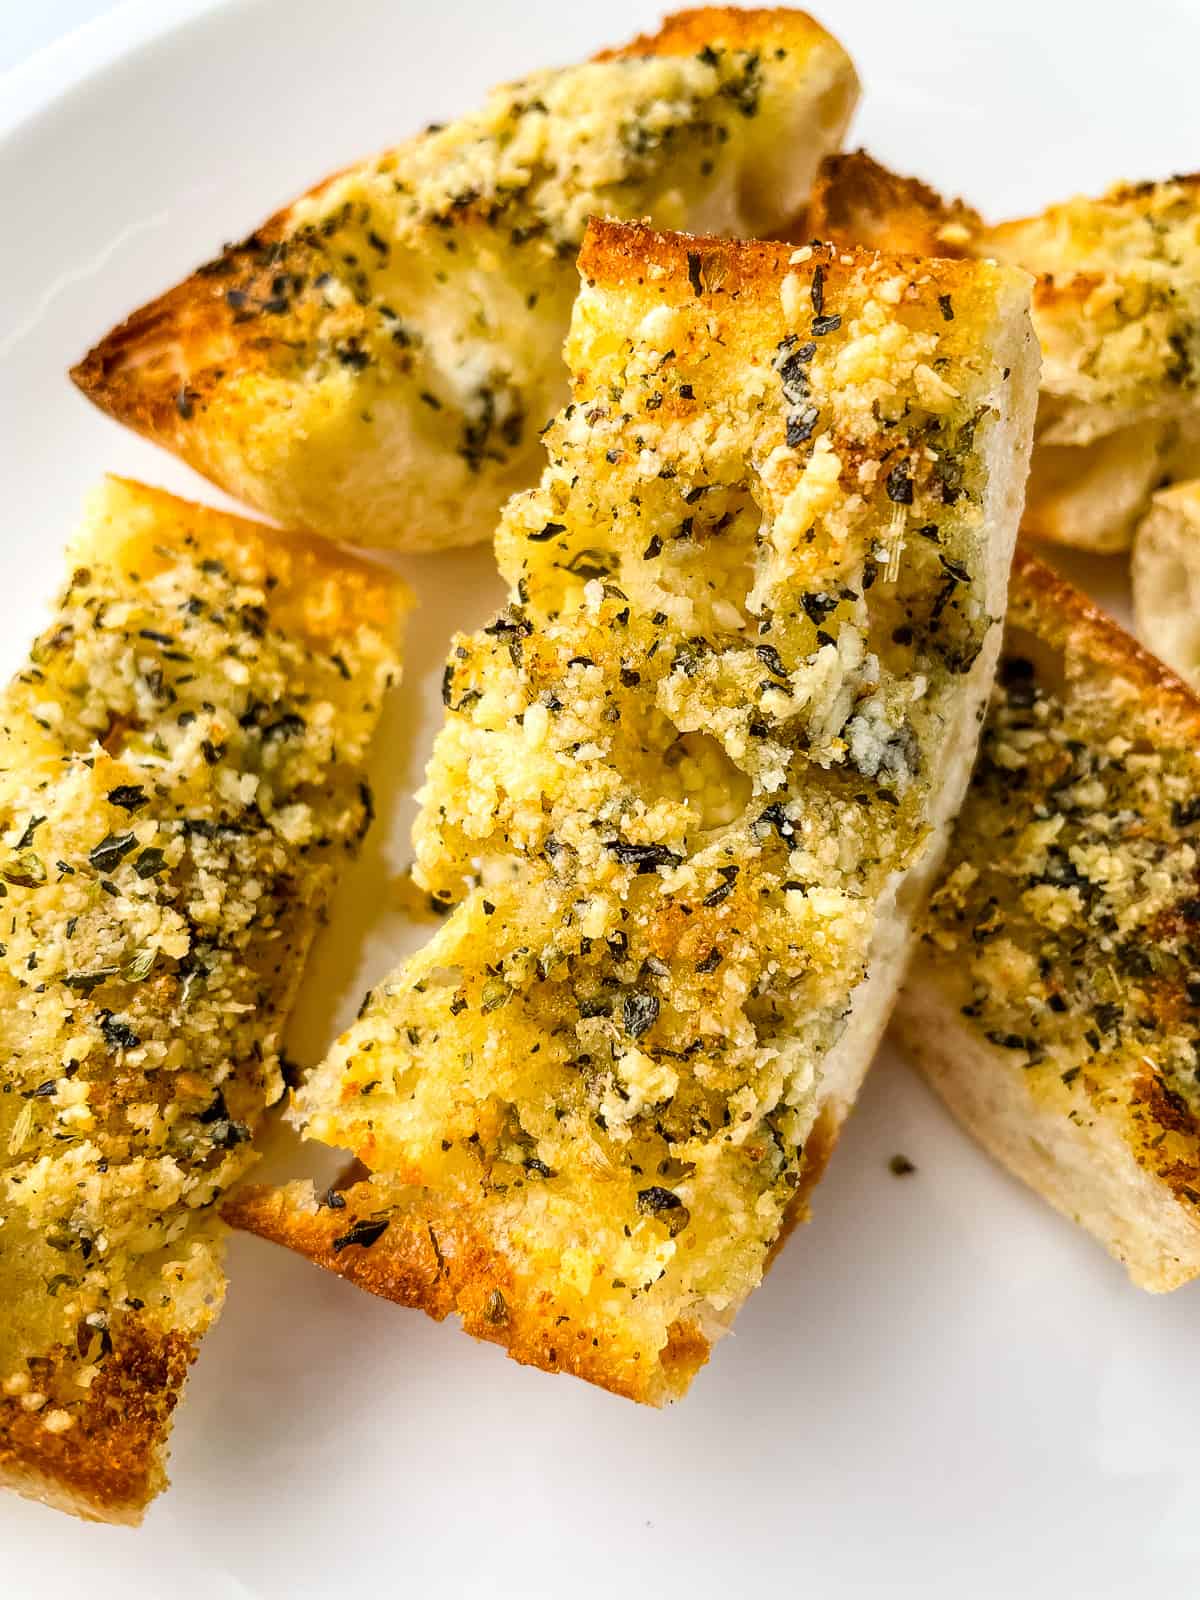 Slices of garlic bread on a plate.